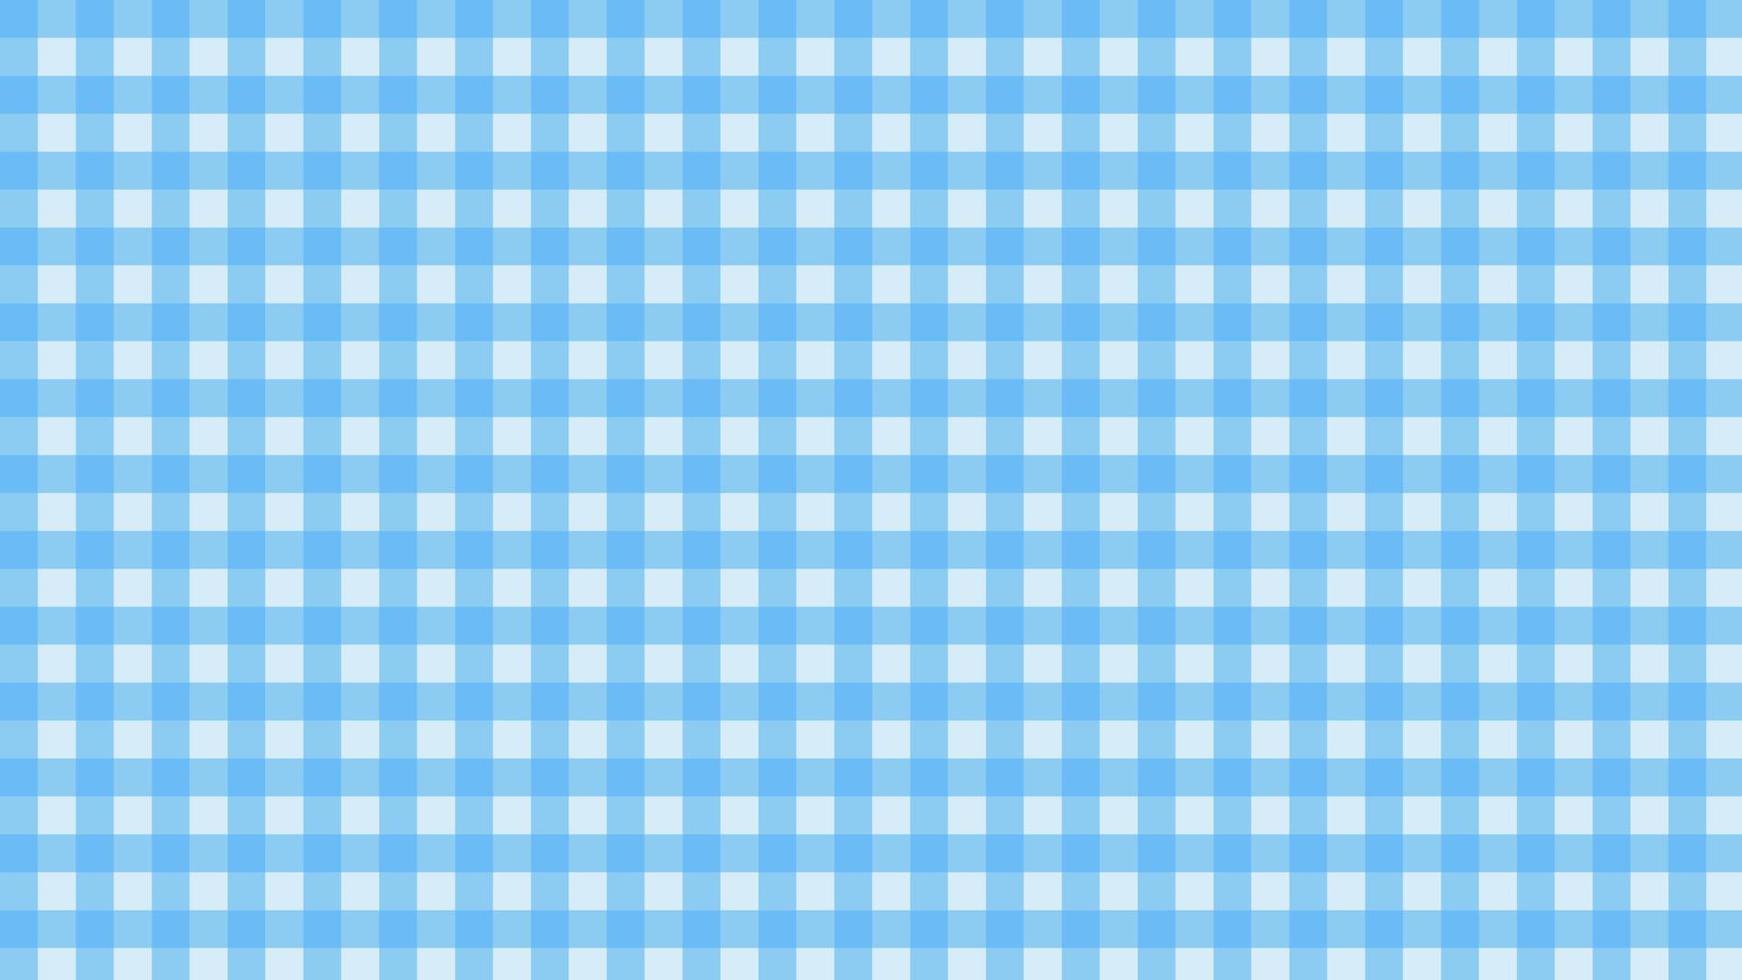 cute blue gingham checkers, plaid, checkerboard pattern aesthetic wallpaper illustration, perfect for wallpaper, backdrop, postcard, background for your design vector